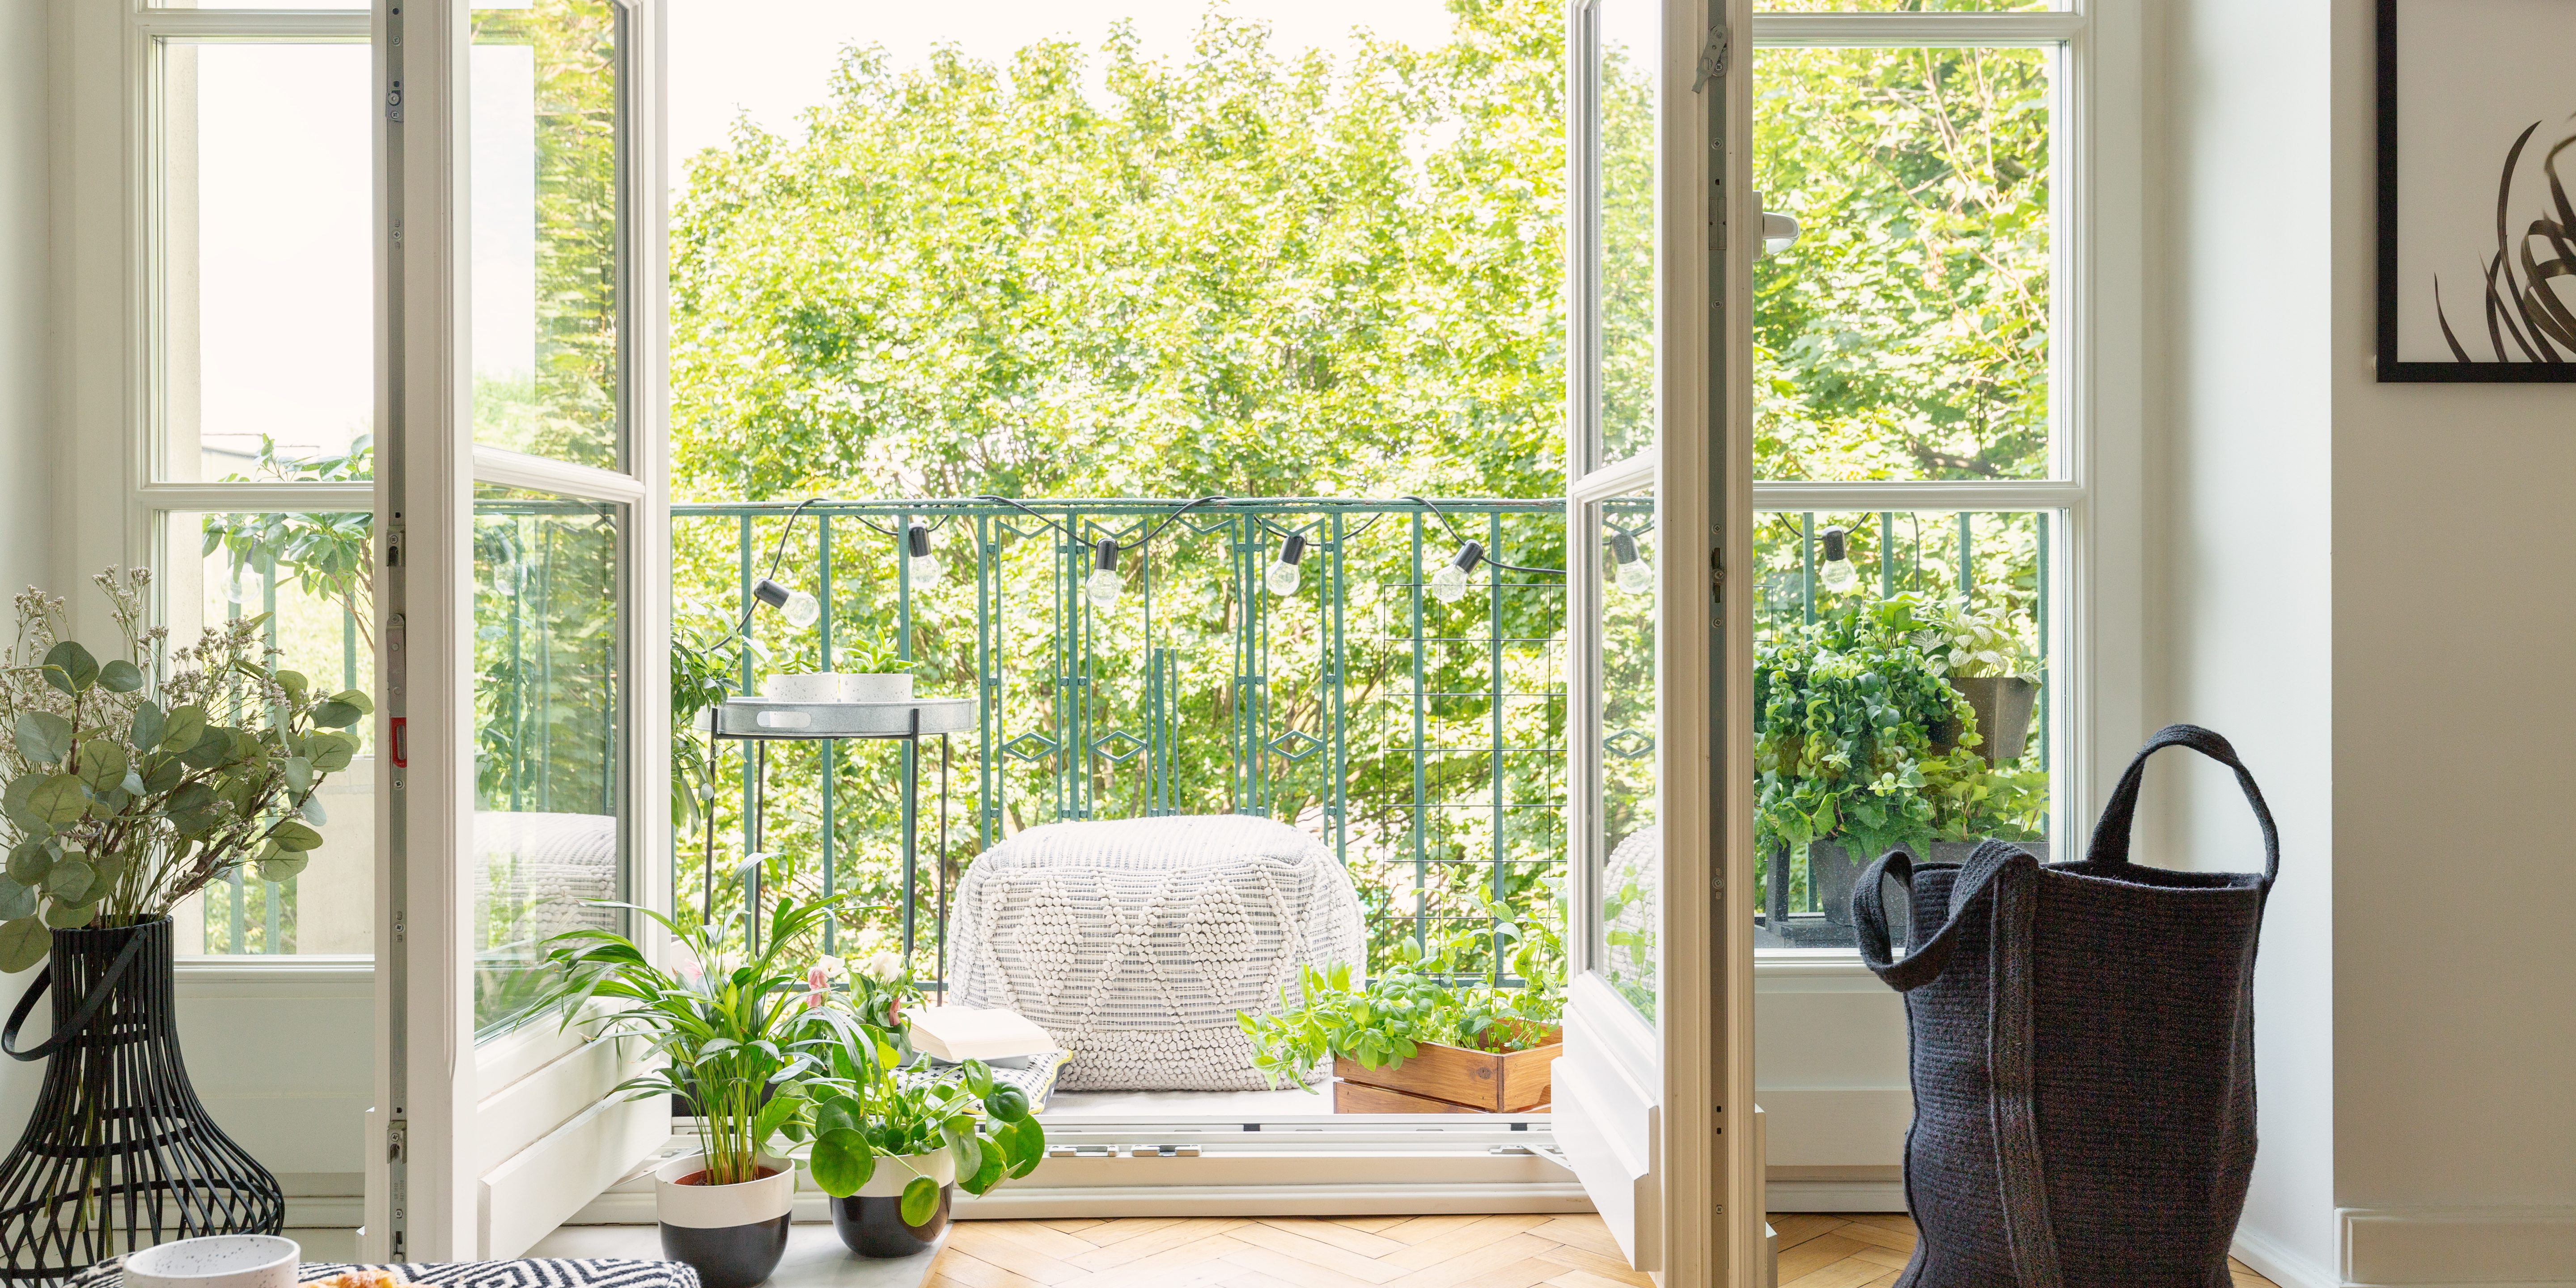 Open glass door from a living room interior into a city garden on a sunny balcony with green plants and comfy furniture